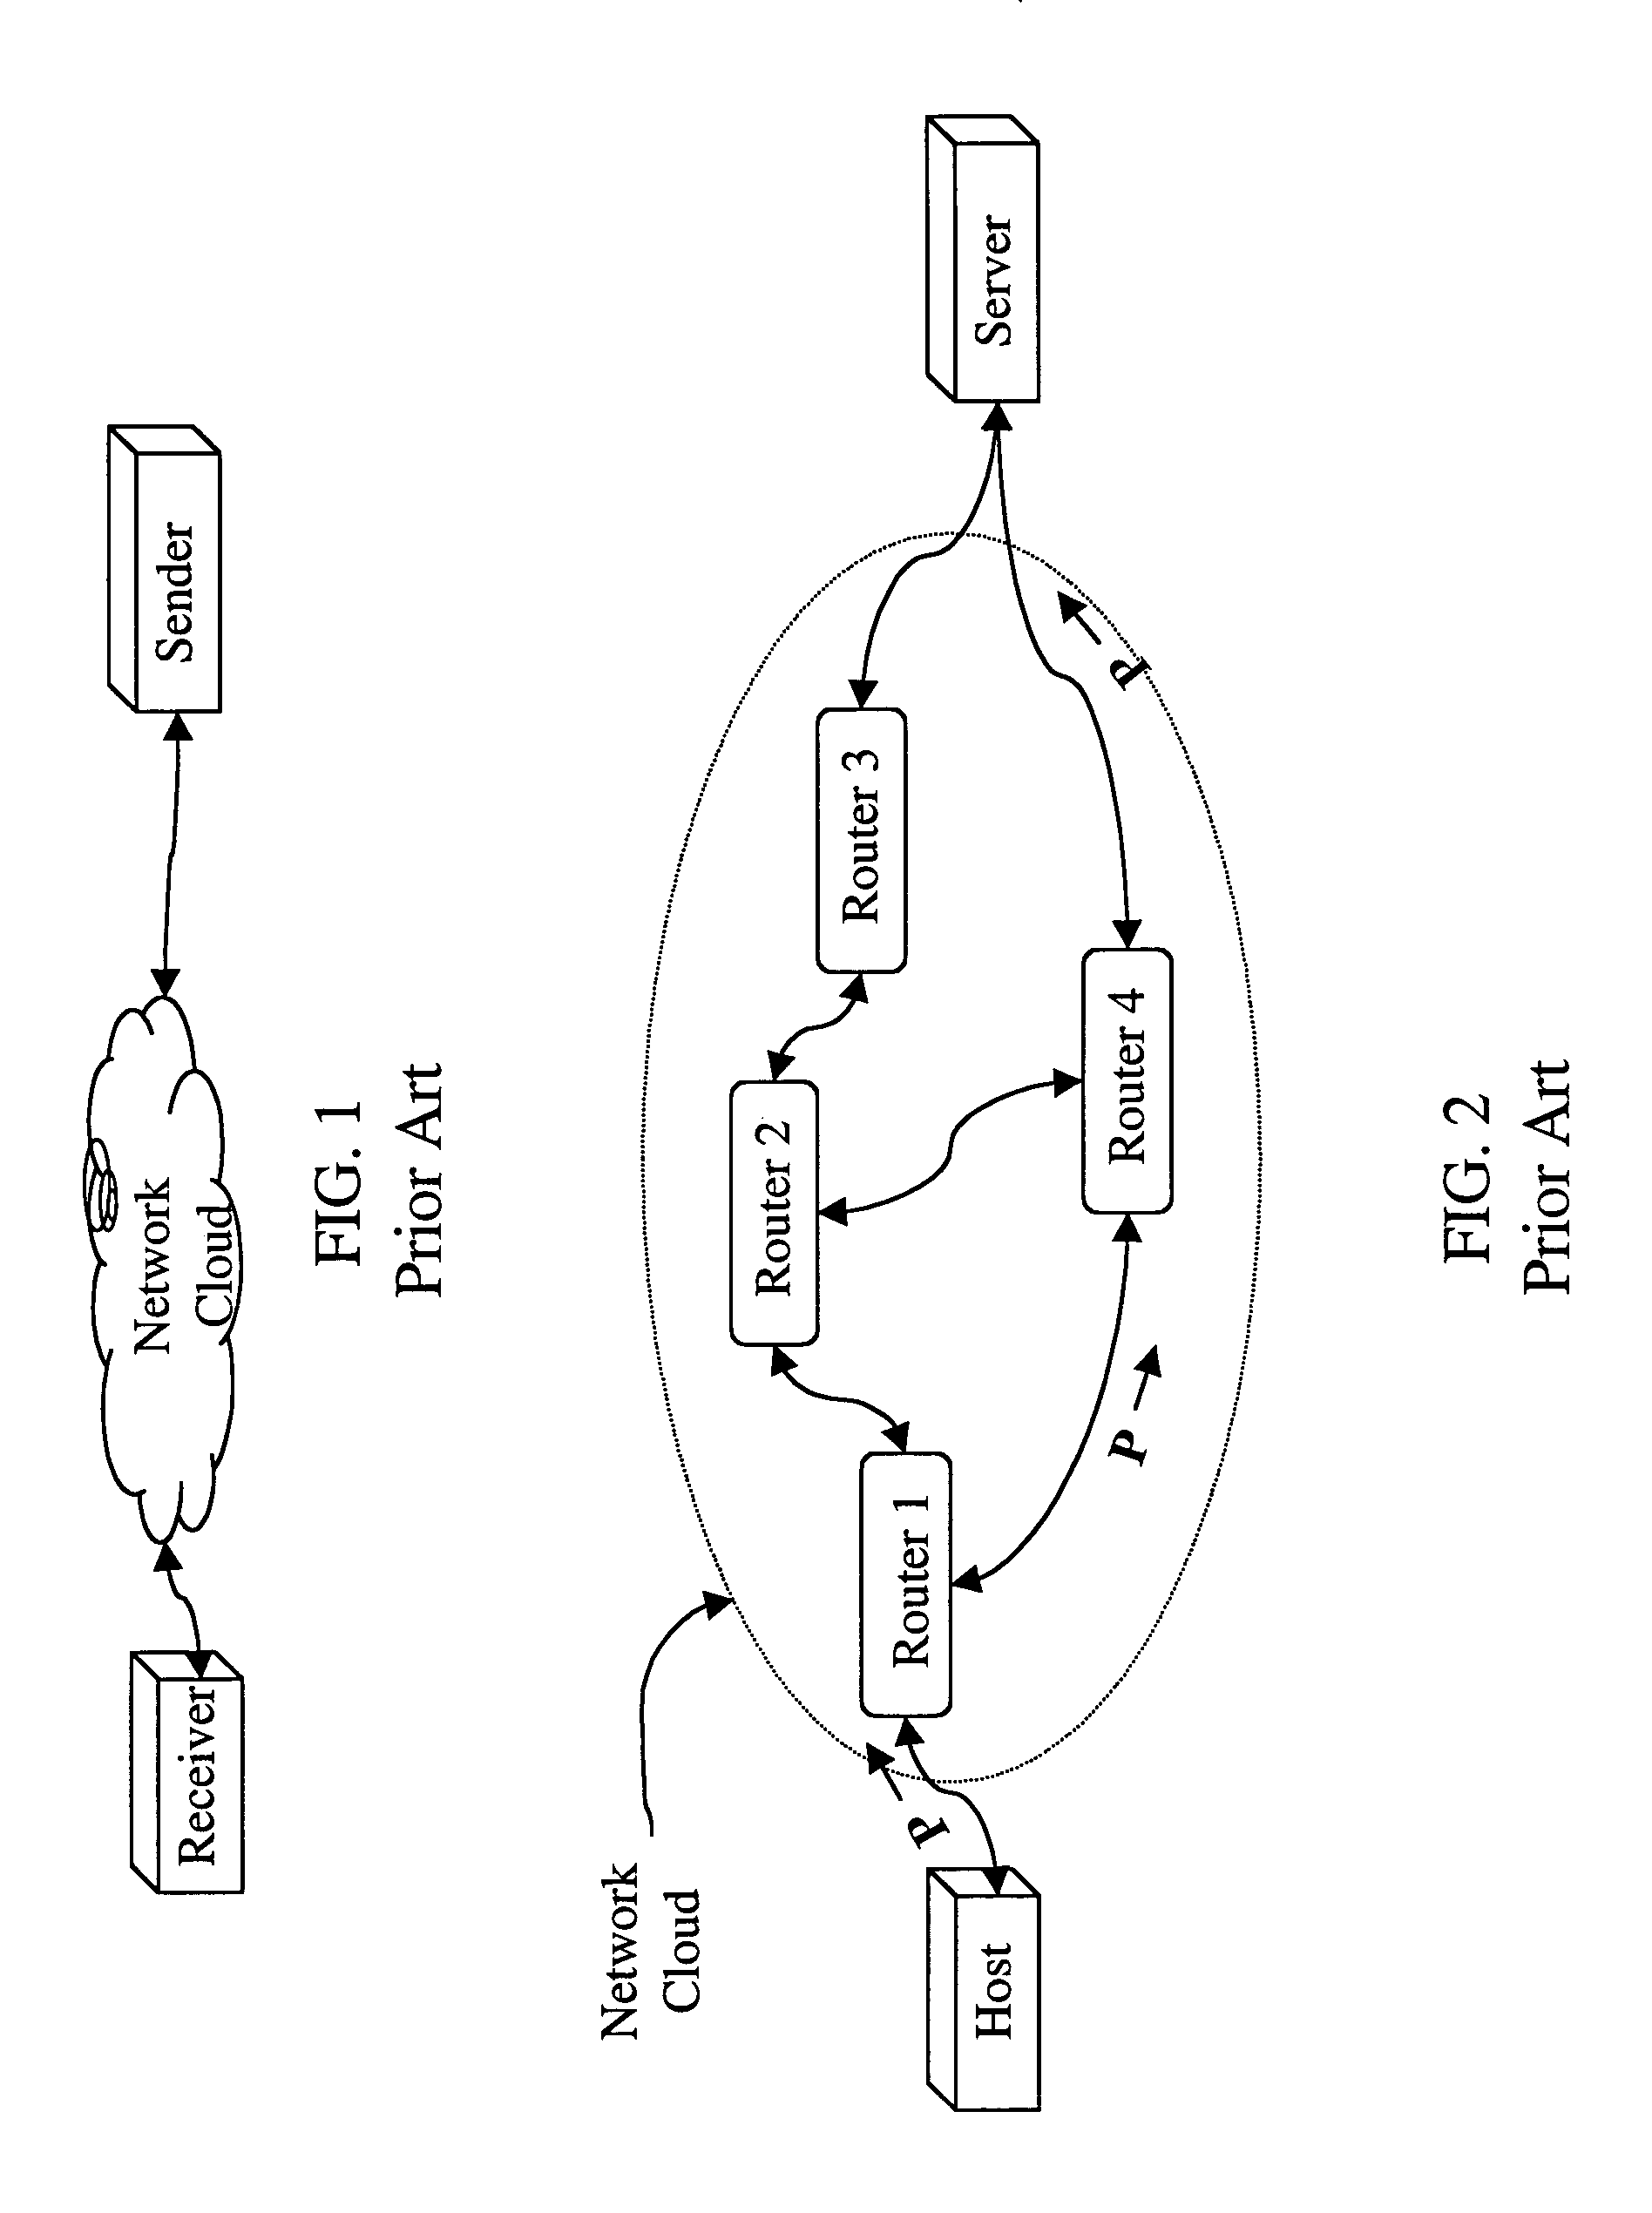 Method and apparatus for cas-based ring limiting of FXS ports